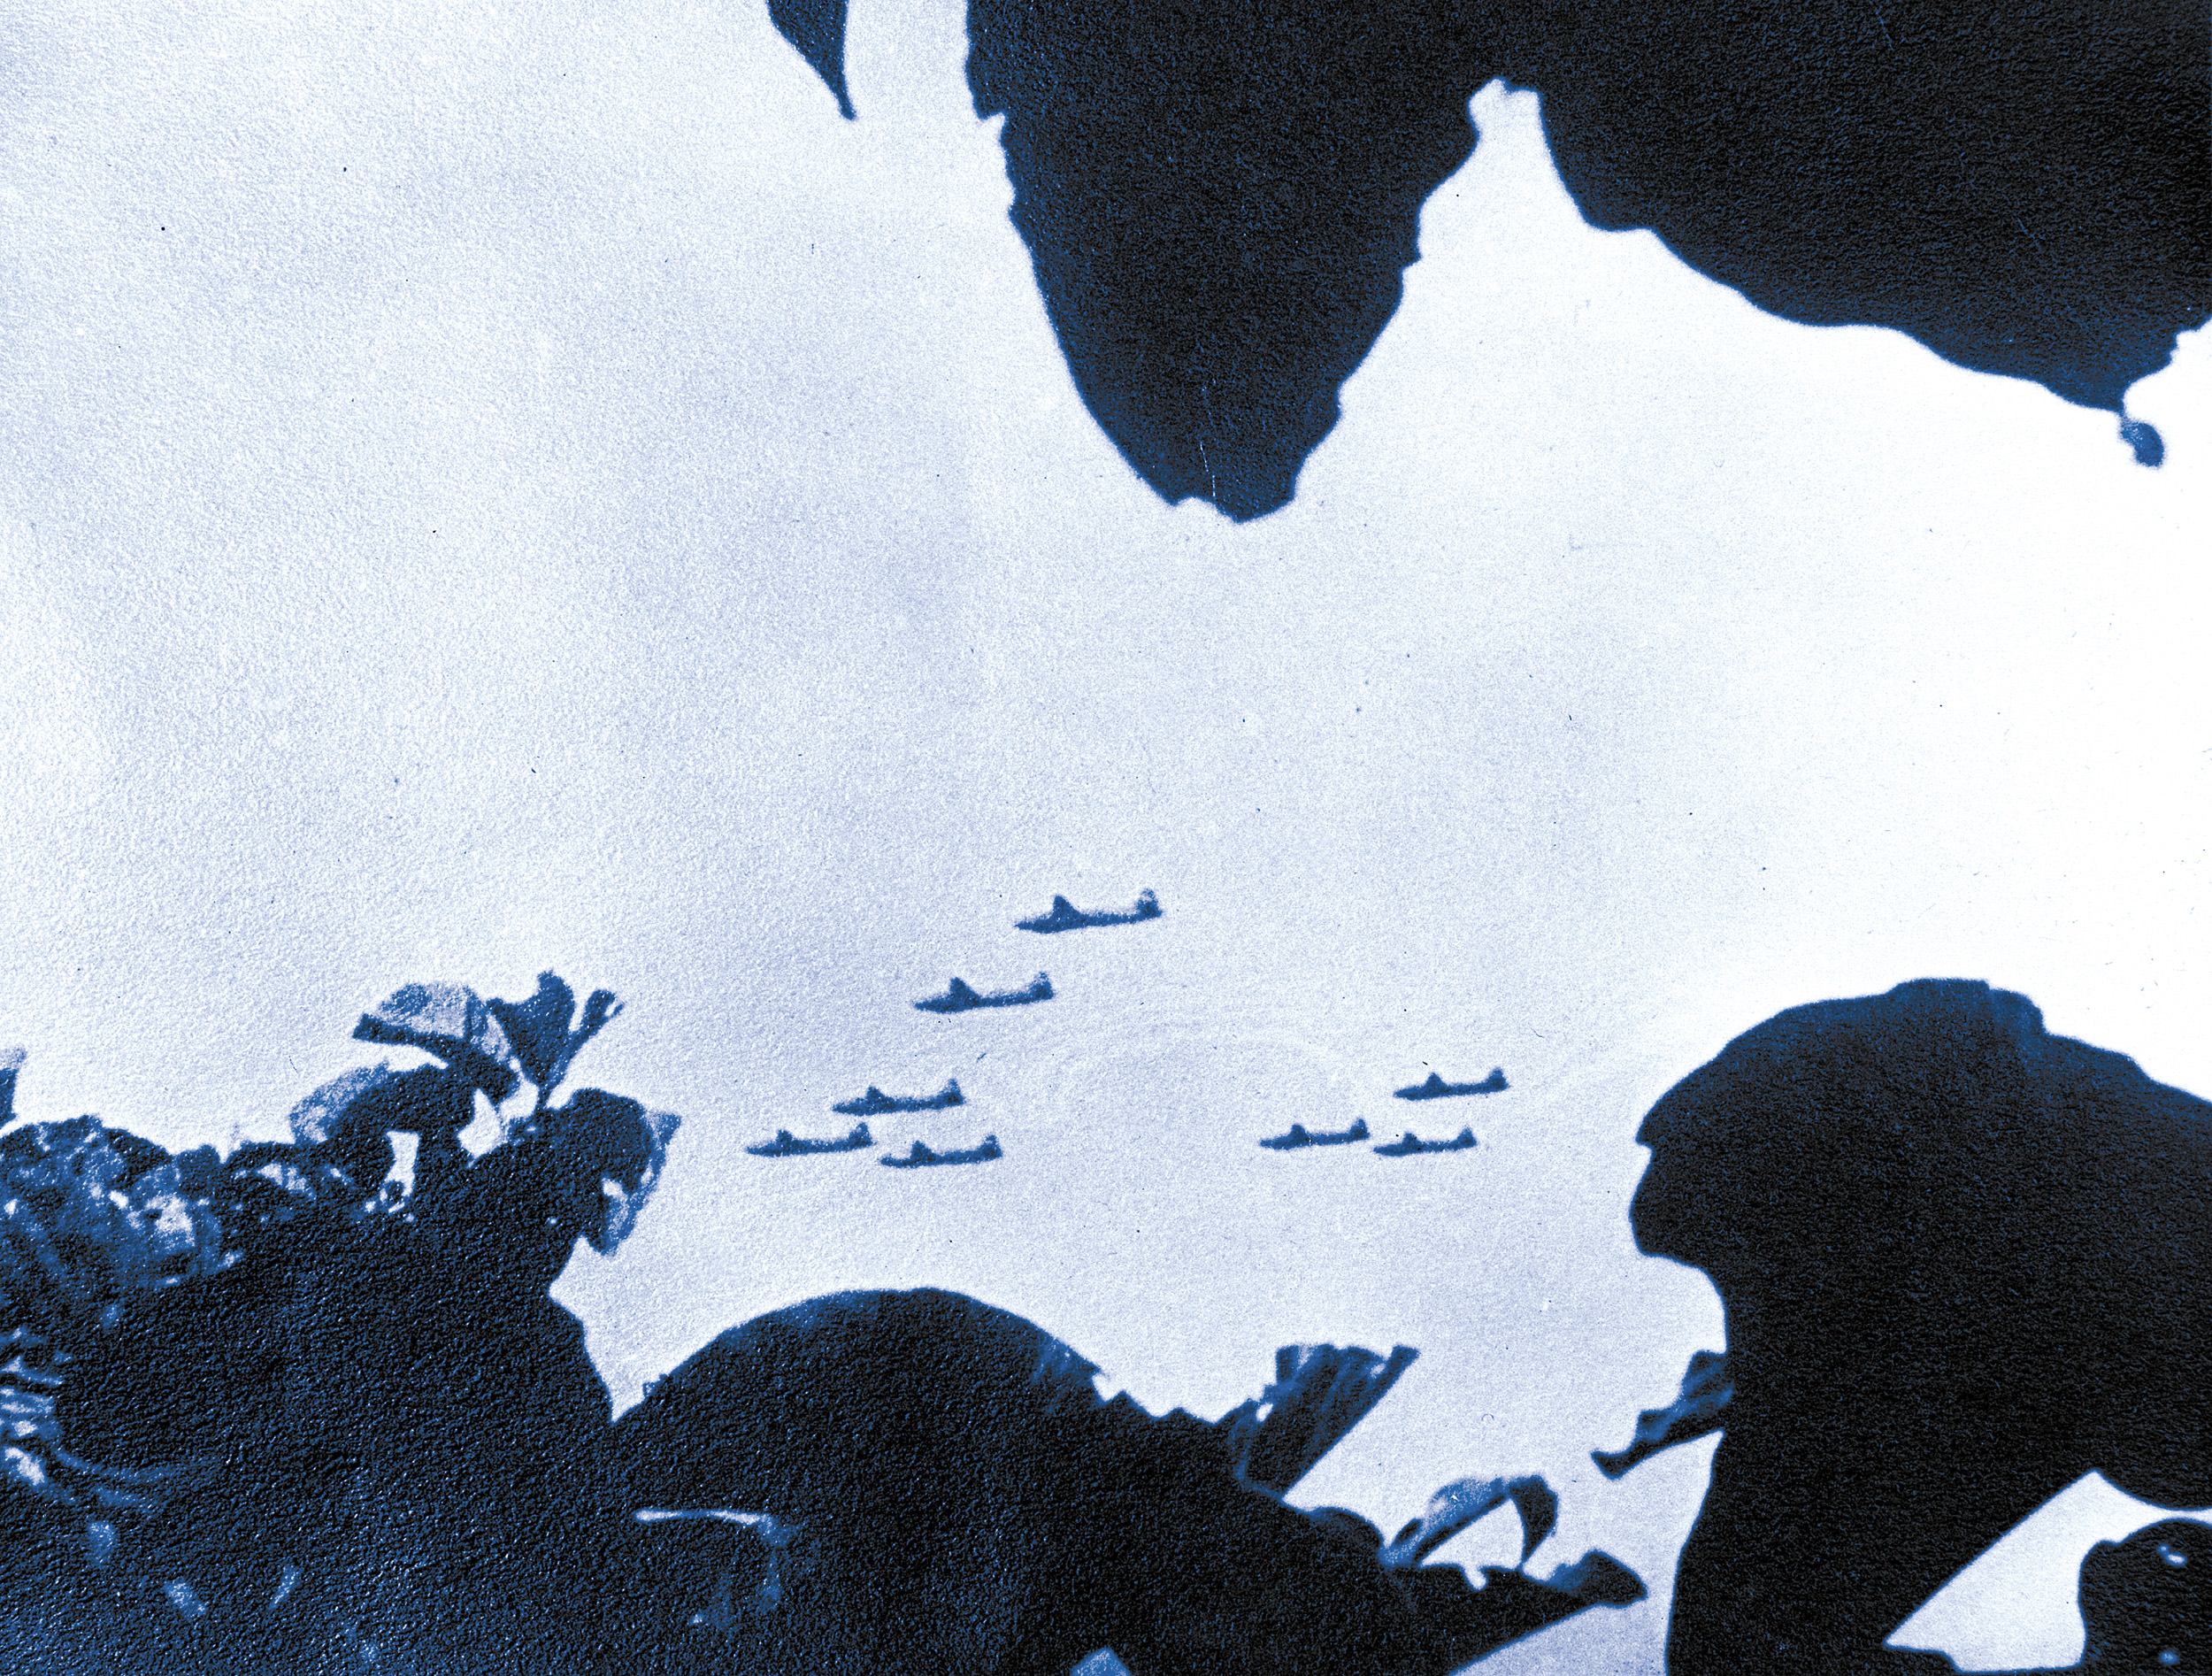 In a 1943 photo possibly taken by a coast watcher, a formation of Japanese Mitsubishi Betty bombers wings its way over New Guinea toward a distant target. 